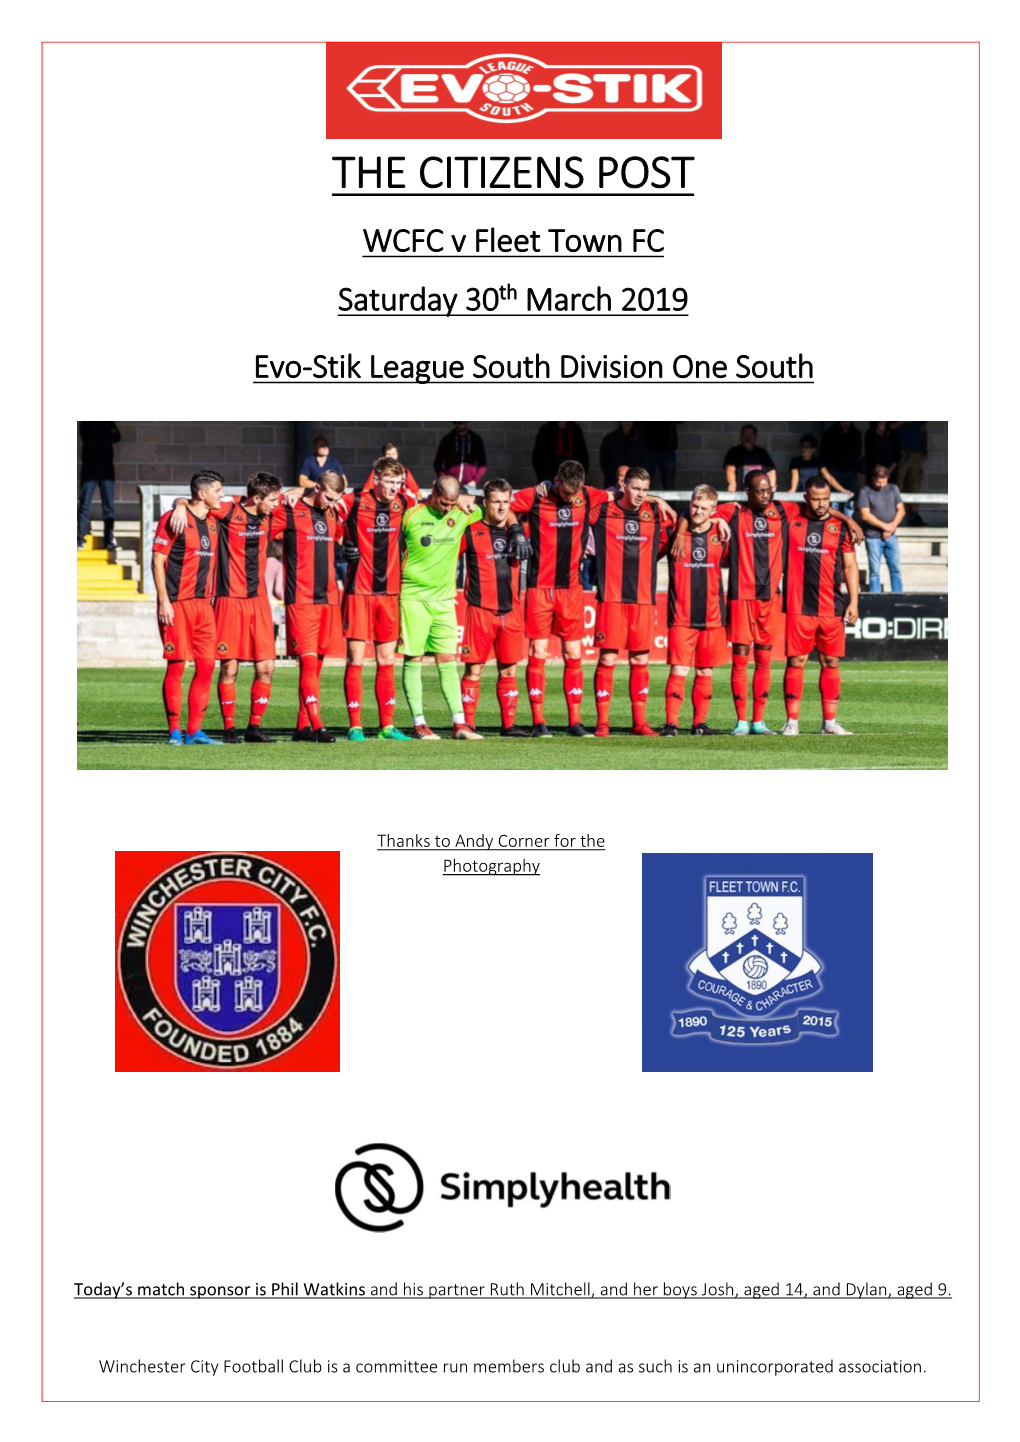 THE CITIZENS POST WCFC V Fleet Town FC Saturday 30Th March 2019 Evo-Stik League South Division One South